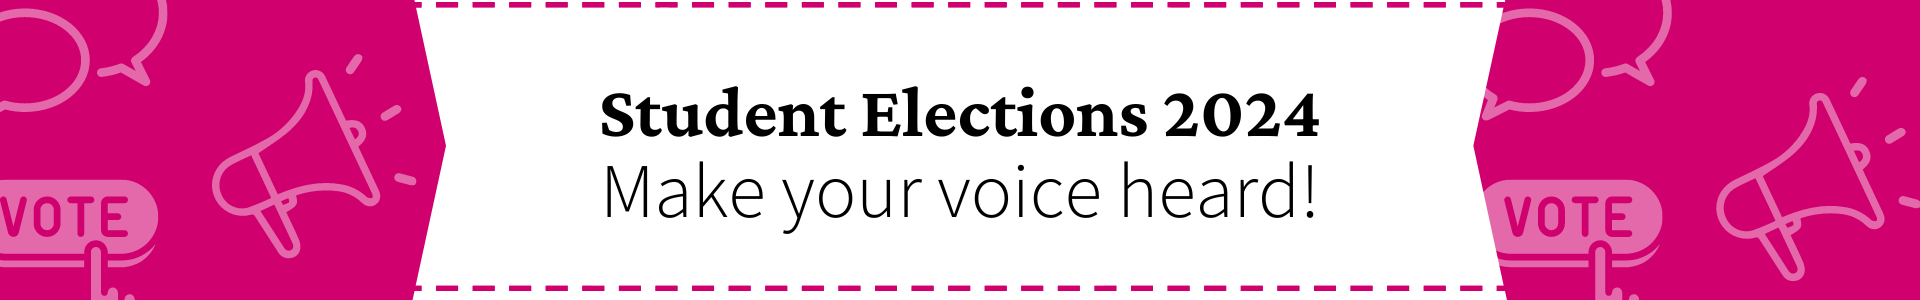 Make your voice heard! Student representation and government explained